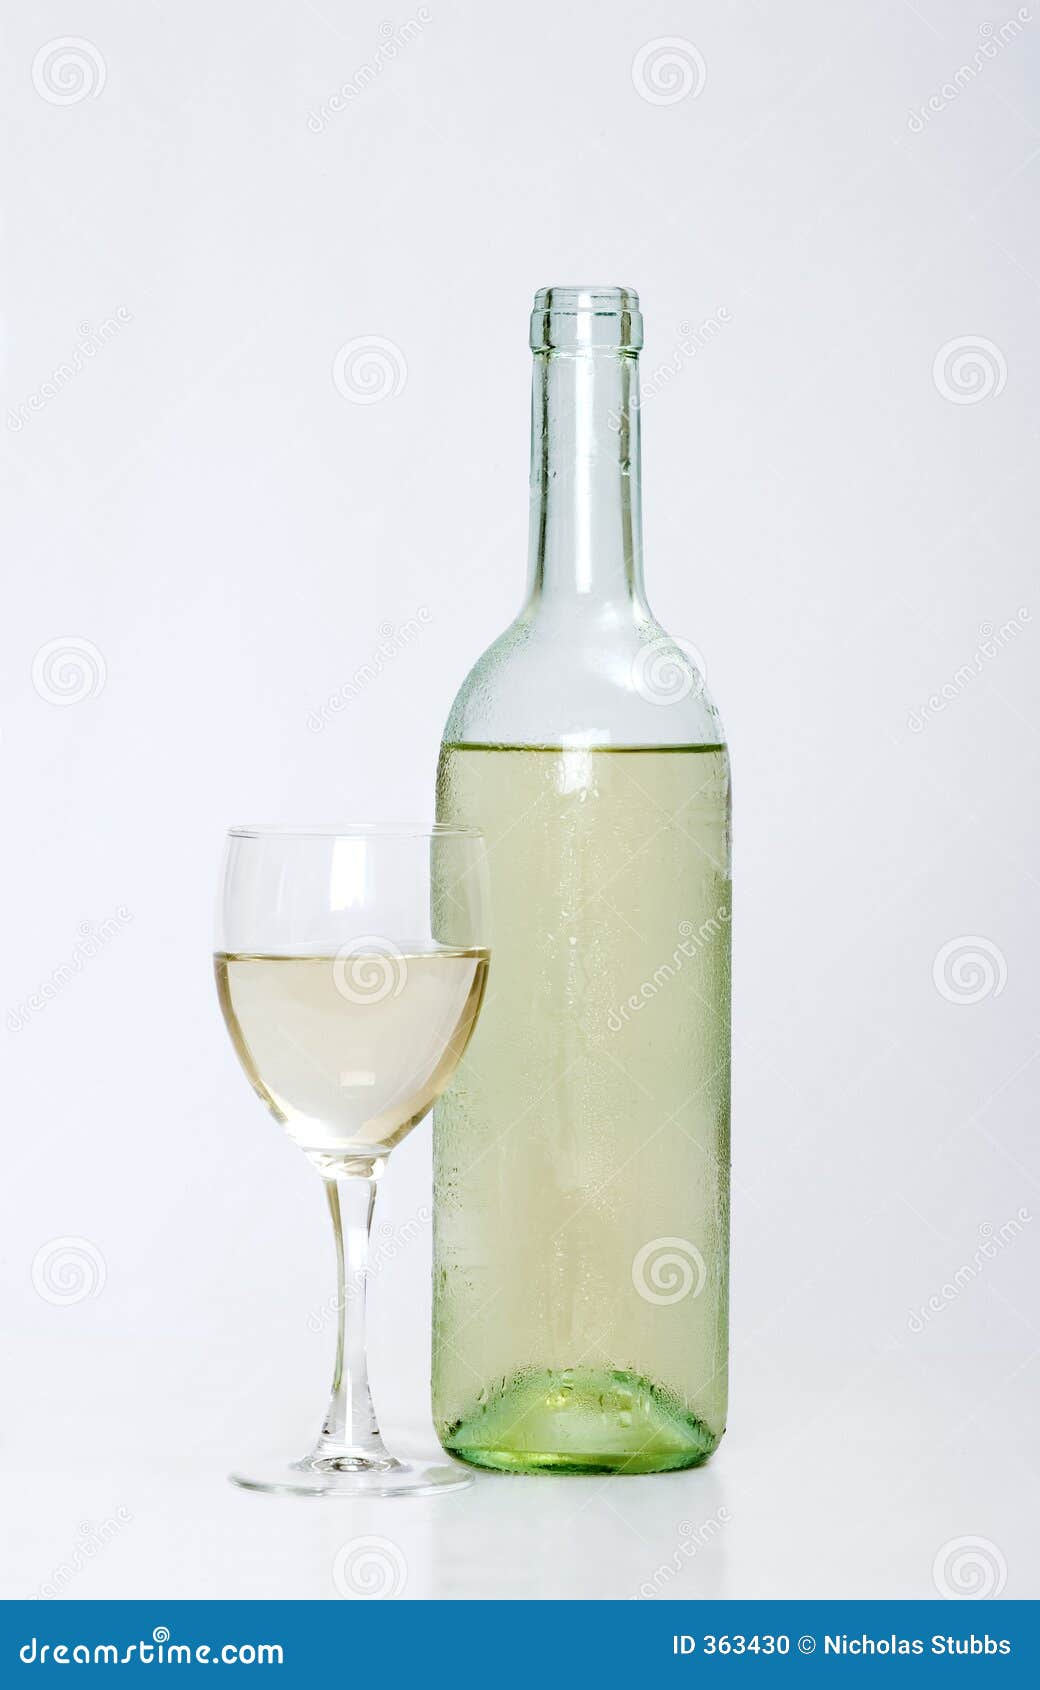 white wine bottle with half filled glass